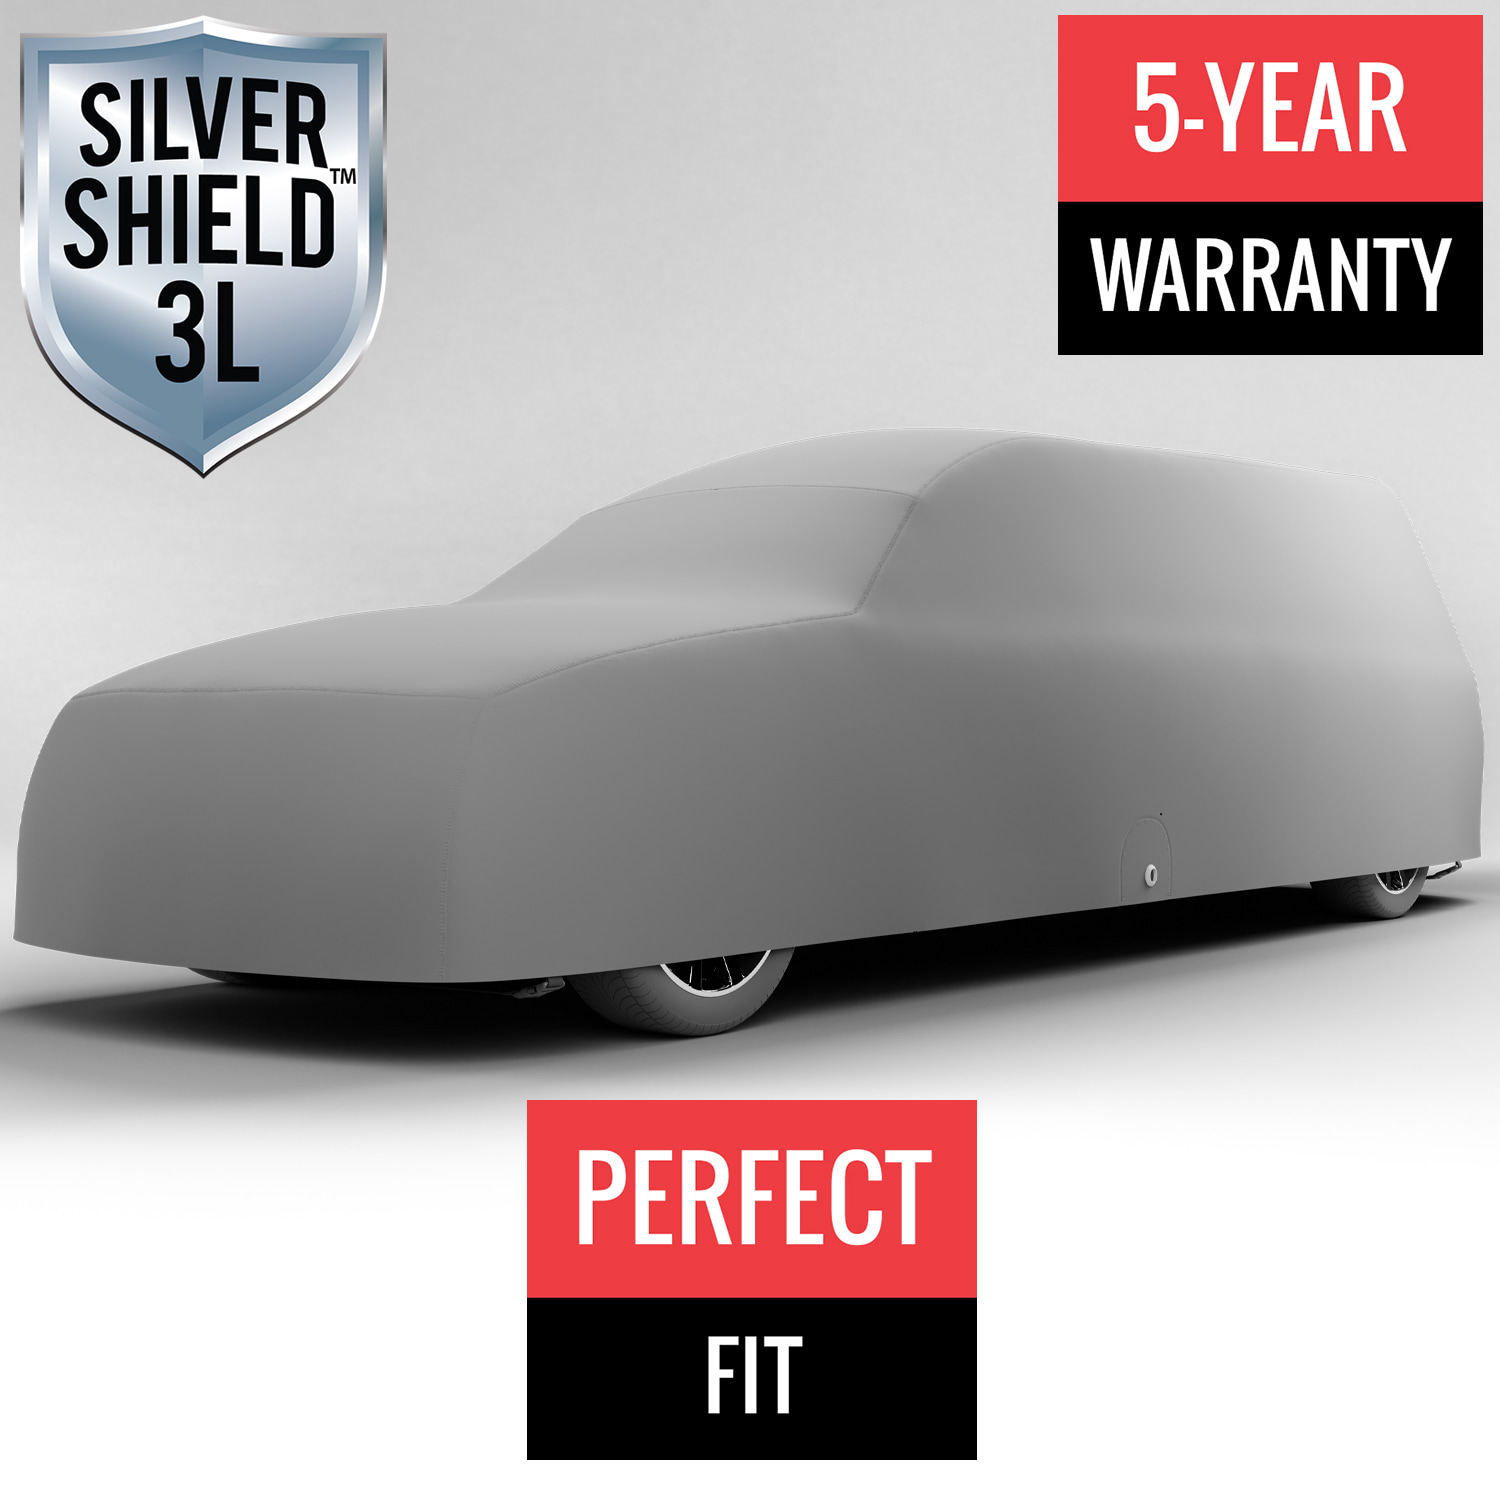 Silver Shield 3L - Cover for Hearse Up to 22 Feet Long